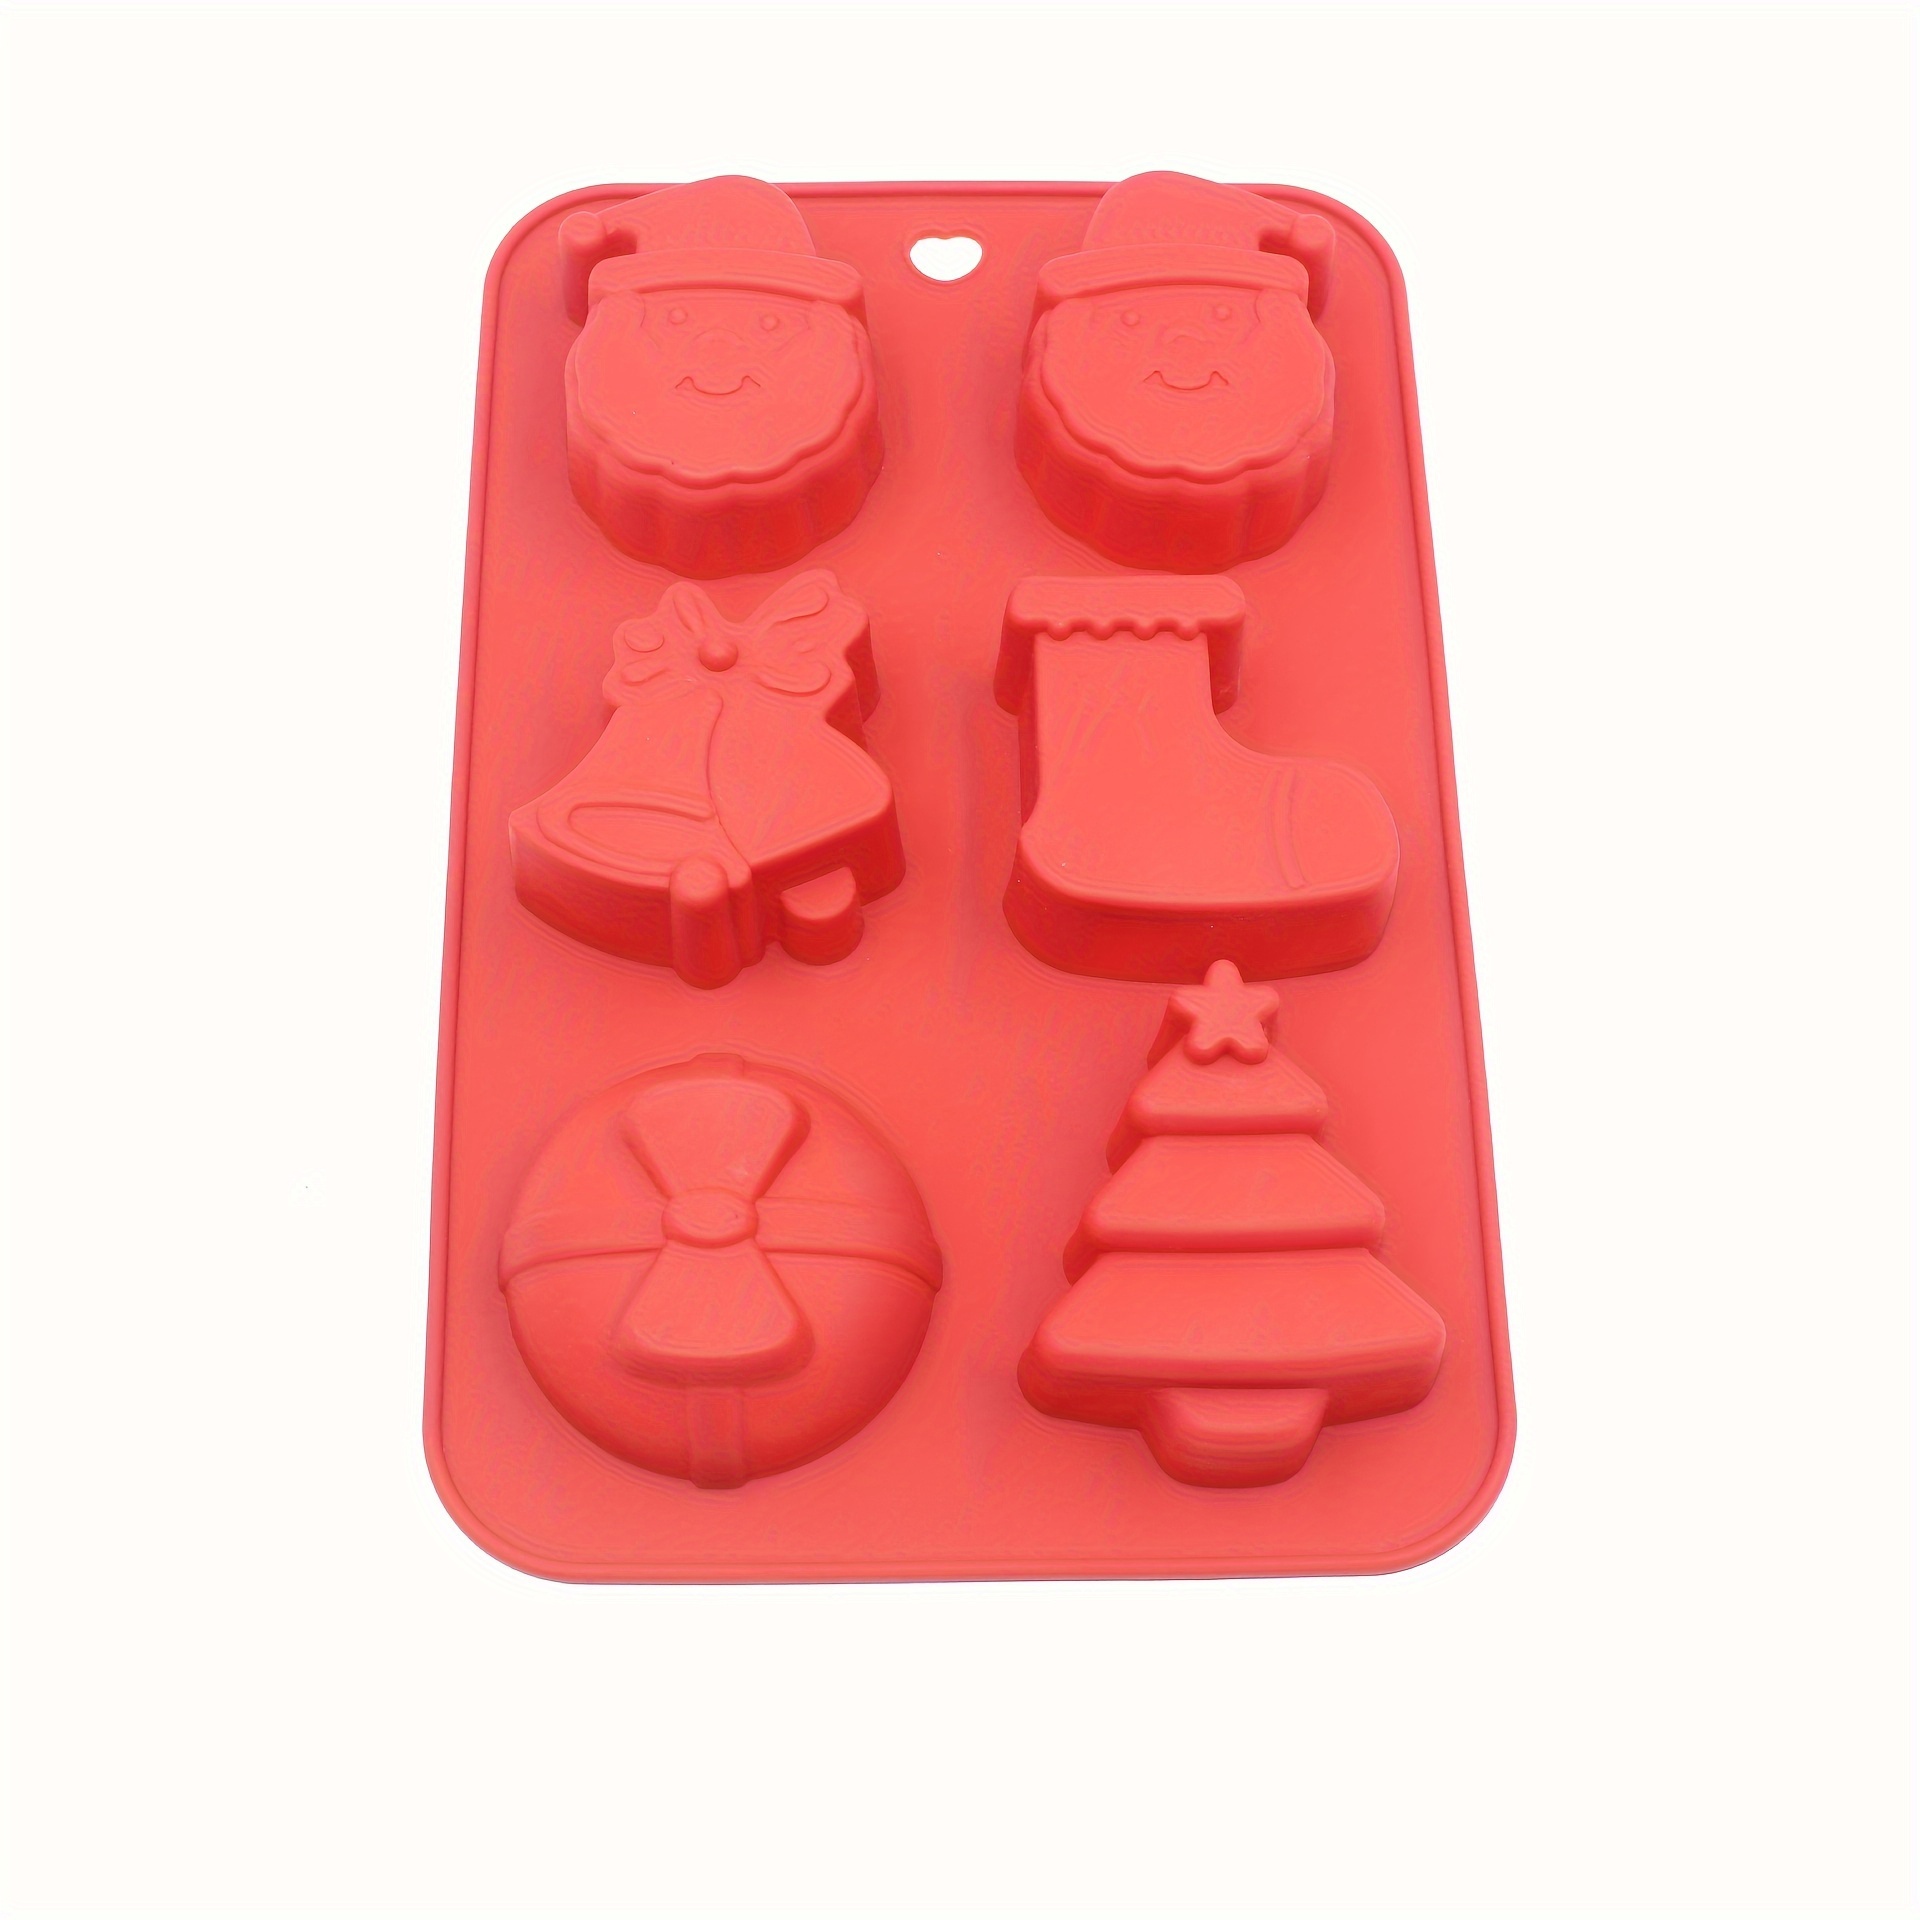 Silicone Christmas Mold High Temperature Resistance Chocolate Cake